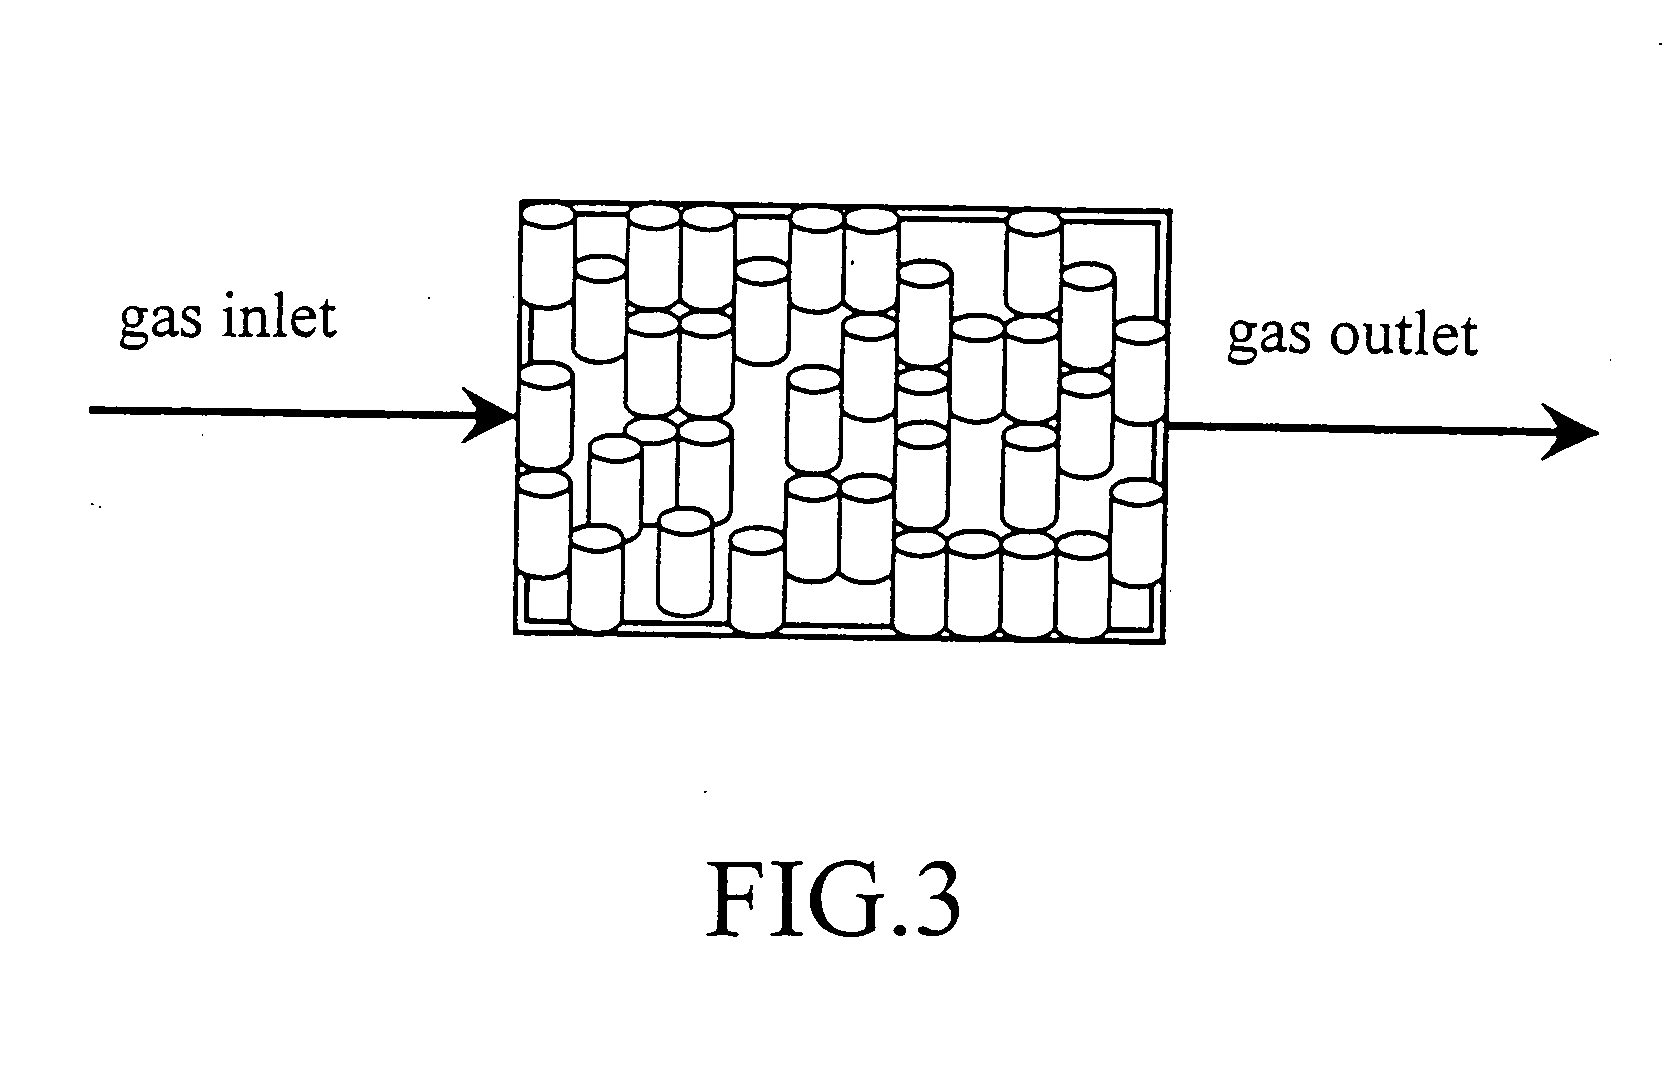 System and process for treating waste gas employing bio-treatment technology